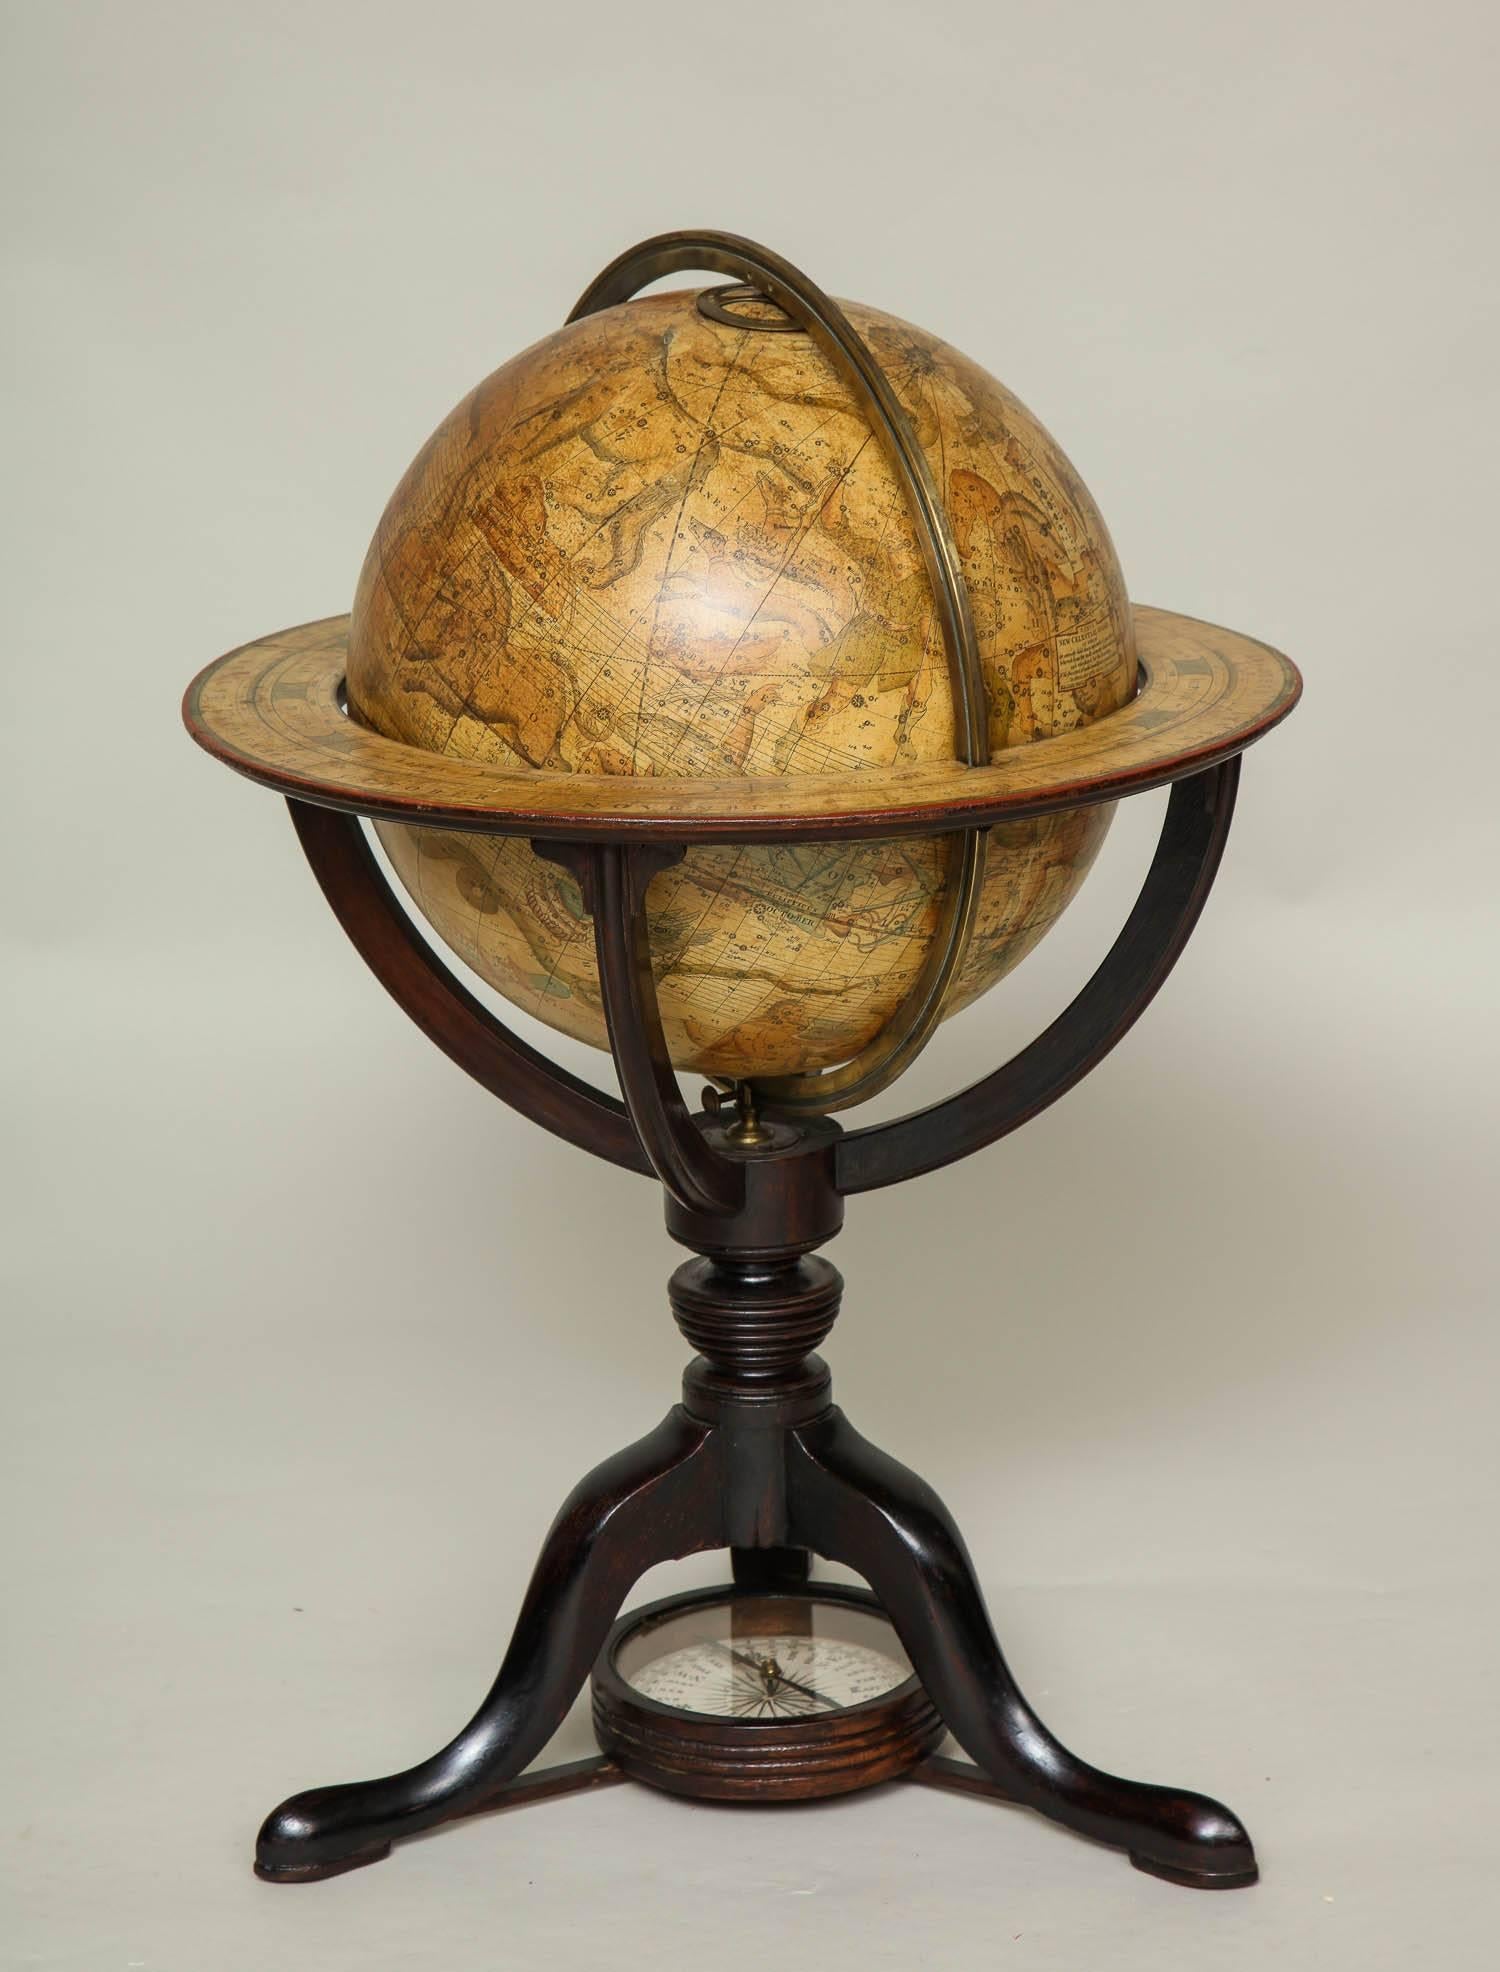 George III Early 19th Century Celestial Globe by Cary